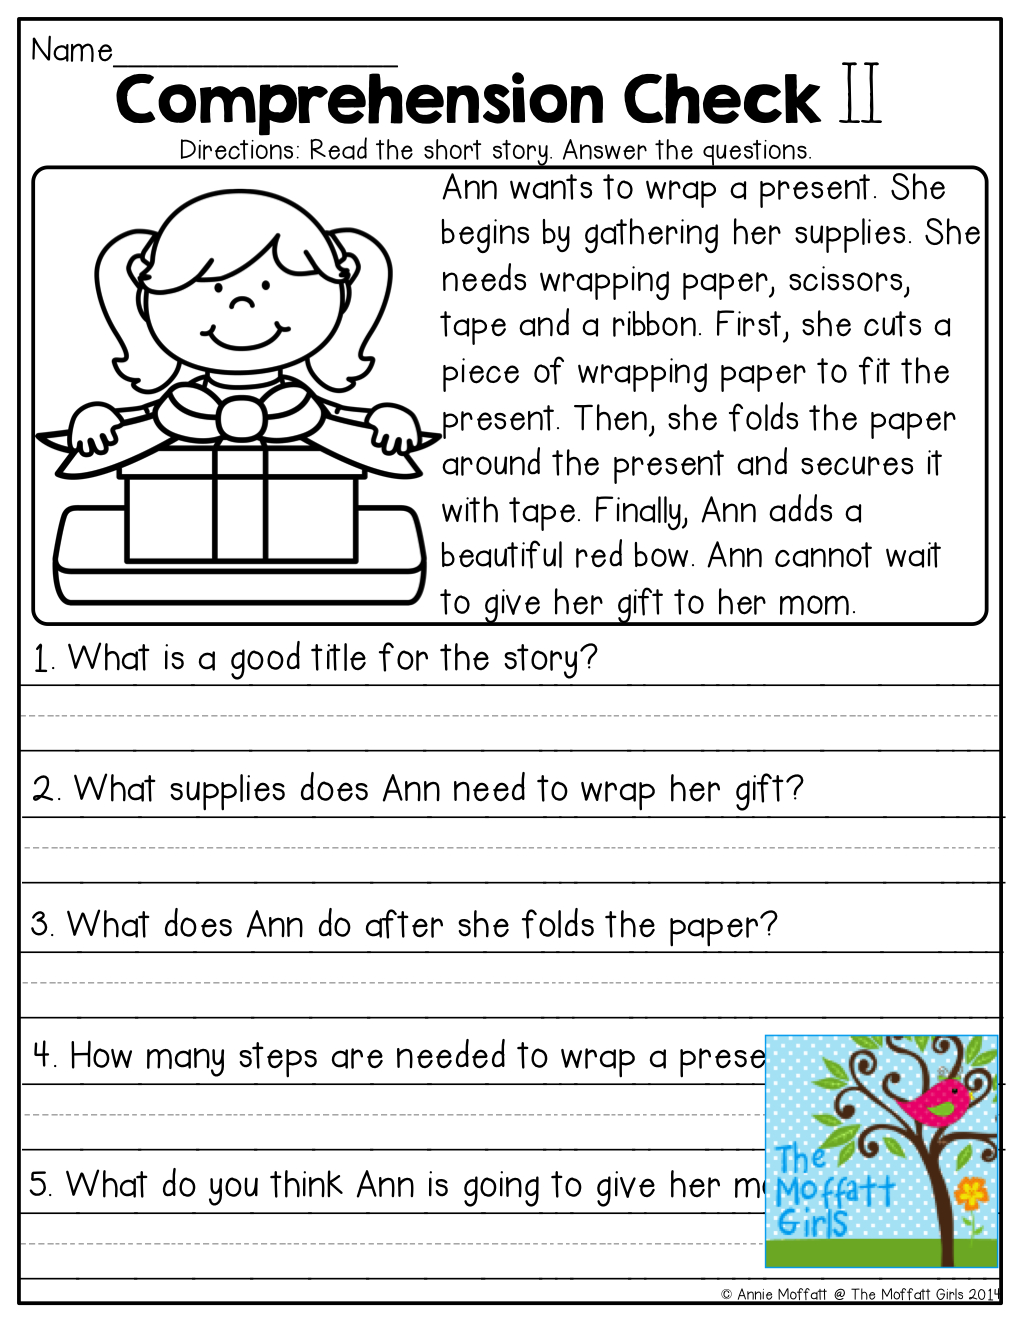 Comprehension Checks And Tons Of Other Great Printables! | Learn It - Free Printable Short Stories With Comprehension Questions